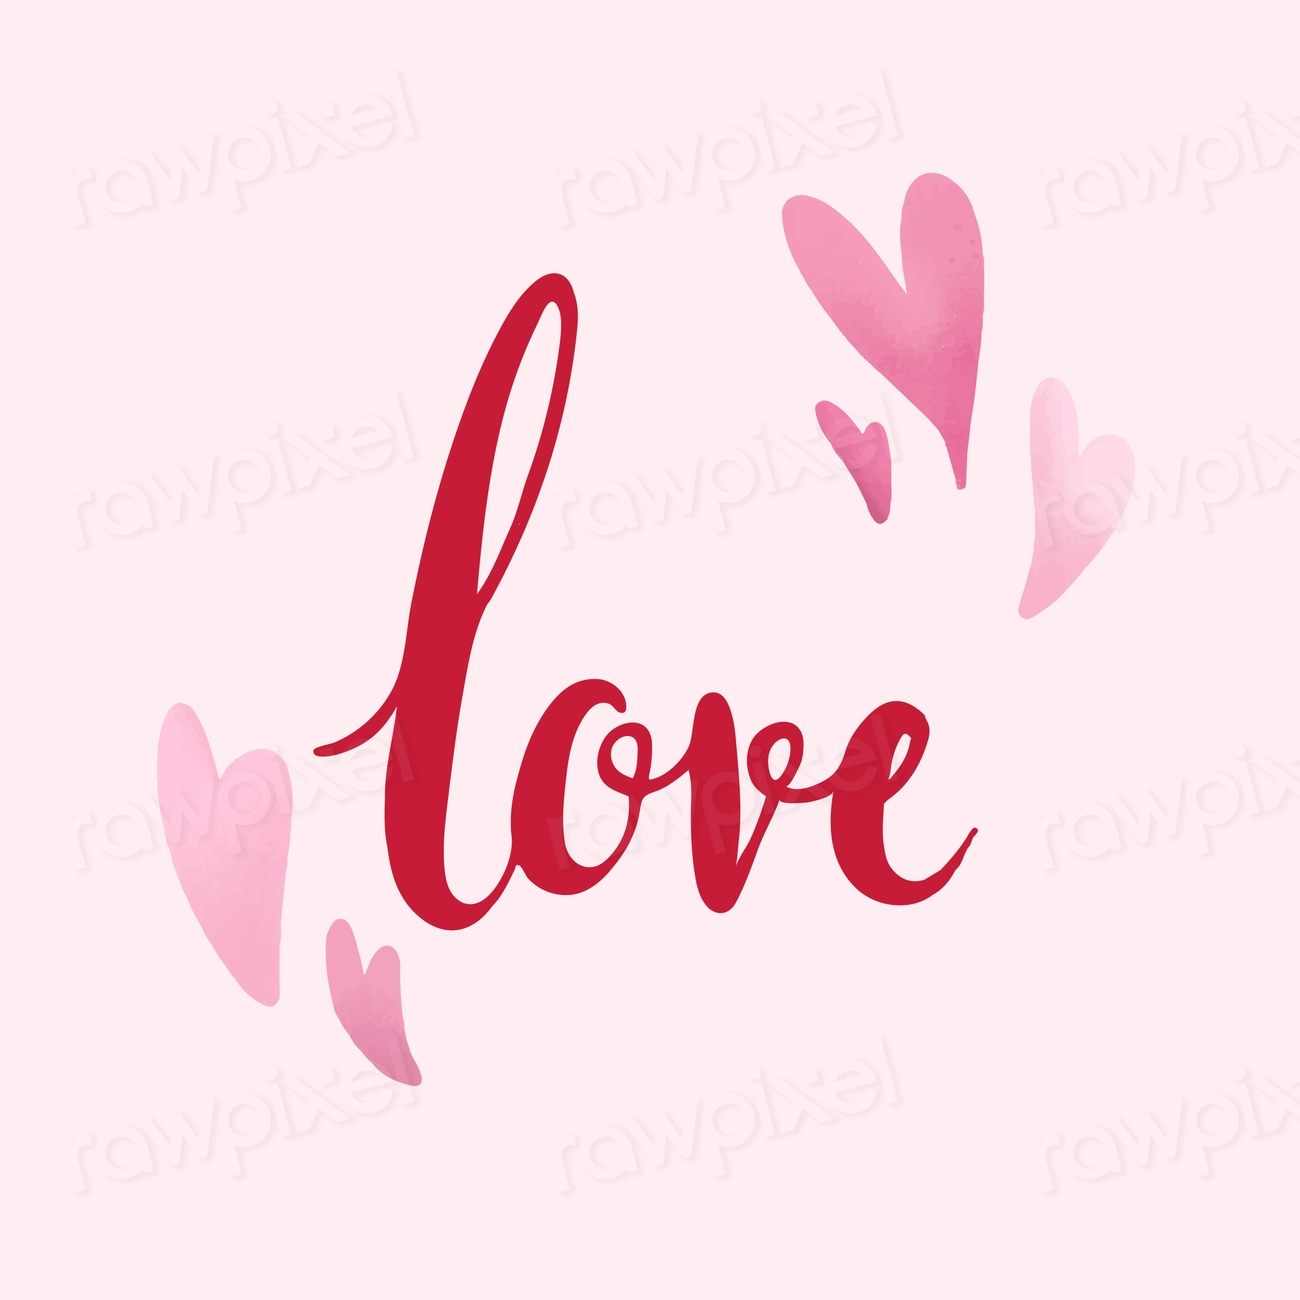 Free Romantic Typography | High Resolution | Royalty free stock vector ...